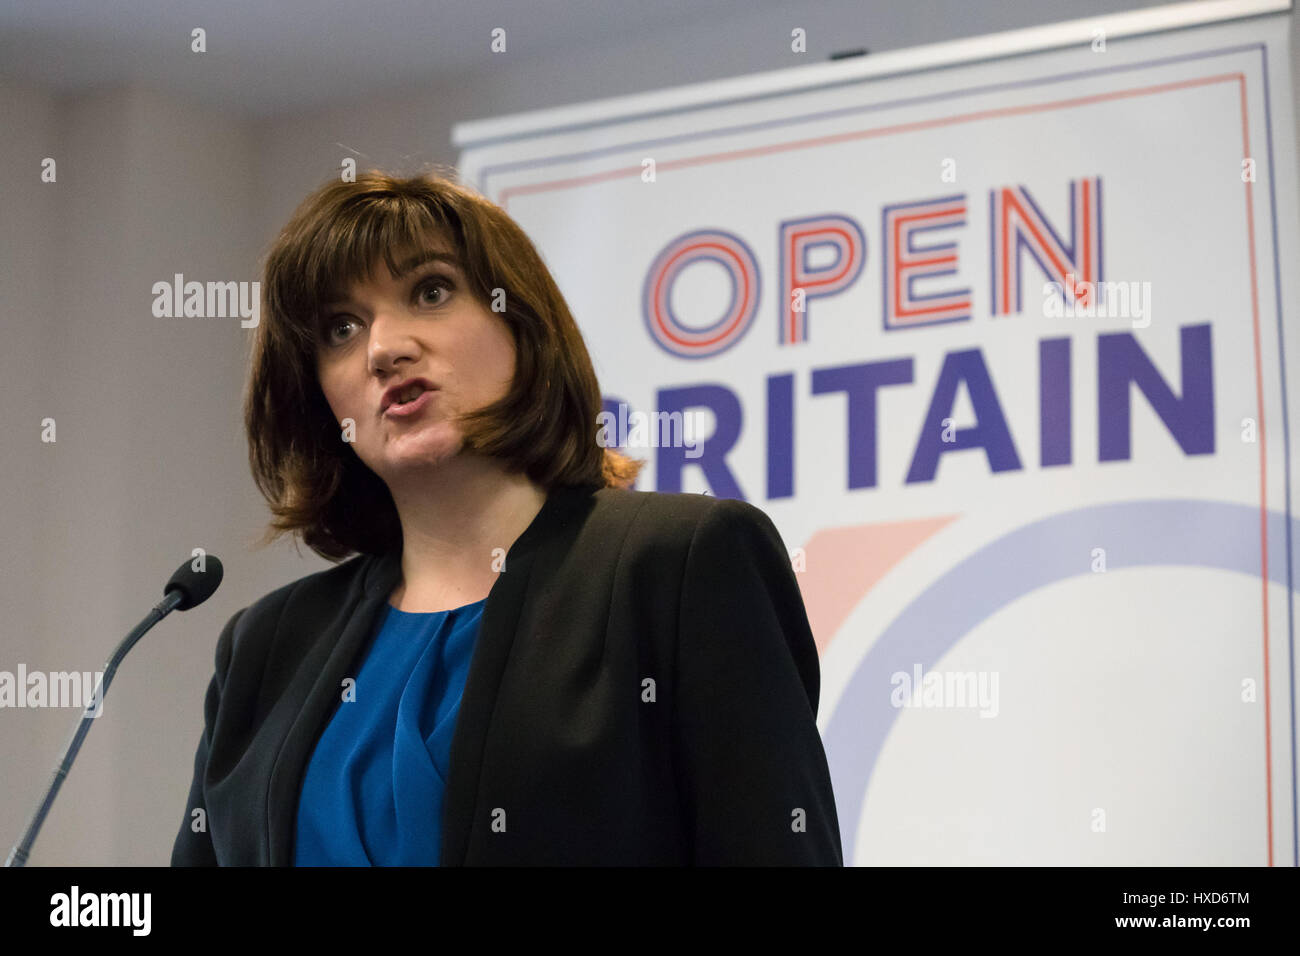 London, UK. 28th March 2017. Nicky Morgan speaking at the Open Britain press conference. Leading supporters of the Open Britain campaign, Nicky Morgan MP, Chris Leslie MP and Nick Clegg MP hosted a press conference in which they answered questions about the Open Britain campaign’s publication: The Government’s Brexit Contract with the British people. Credit: Vickie Flores/Alamy Live News Stock Photo